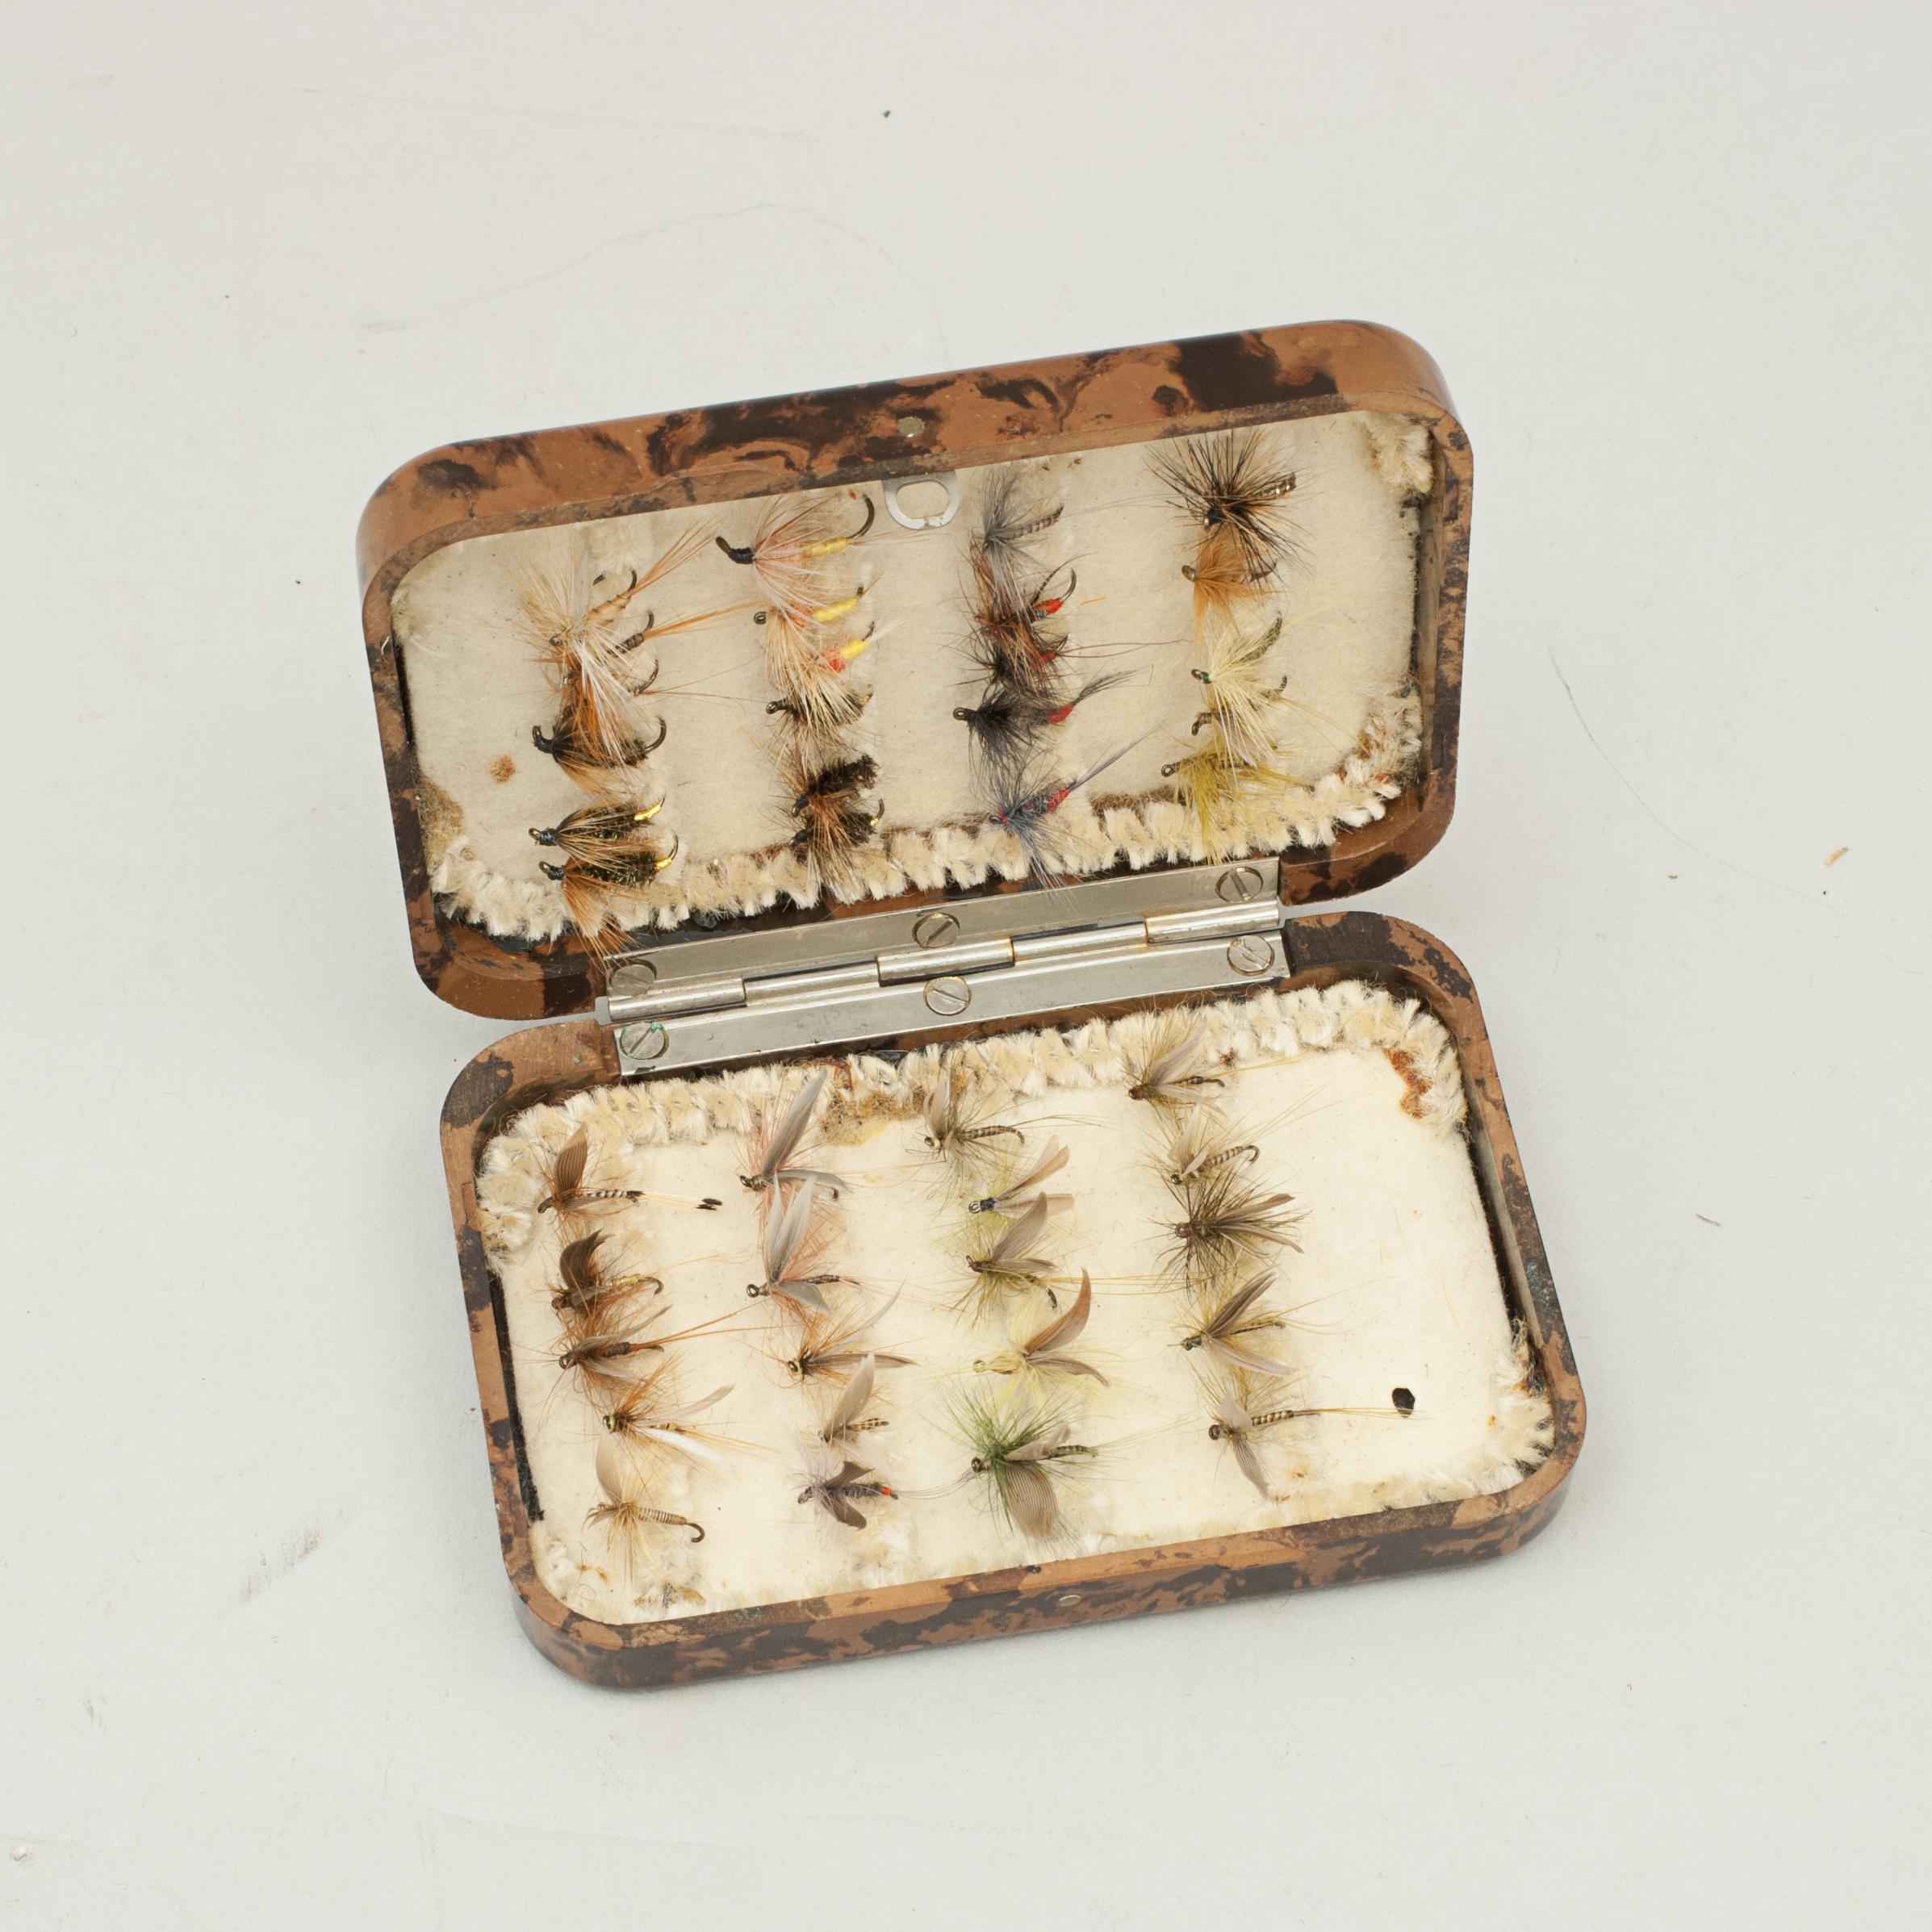 Vintage small Hardy Bros. NerodafFfishing fly box
A good Neroda fly box made from bakelite with a brown tortoiseshell finish manufactured by Hardy's of Alnwick. The lid is embossed with 'HARDY BROS. MAKERS ENGLAND' and holding a small selection of